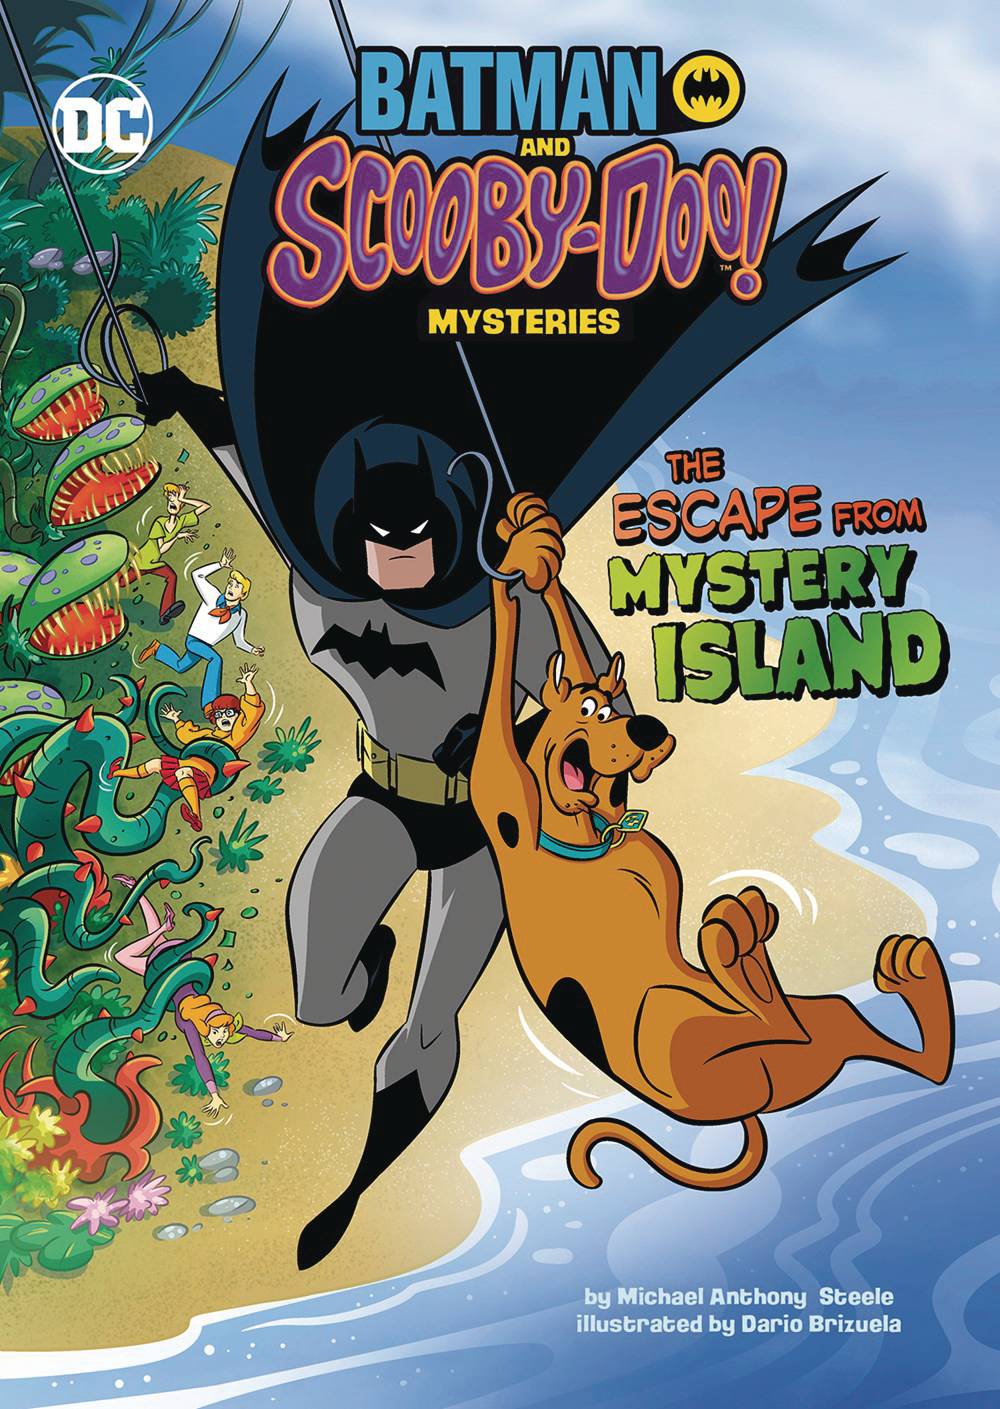 Batman Scooby Doo Mysteries Escape From Mystery Island - State of Comics